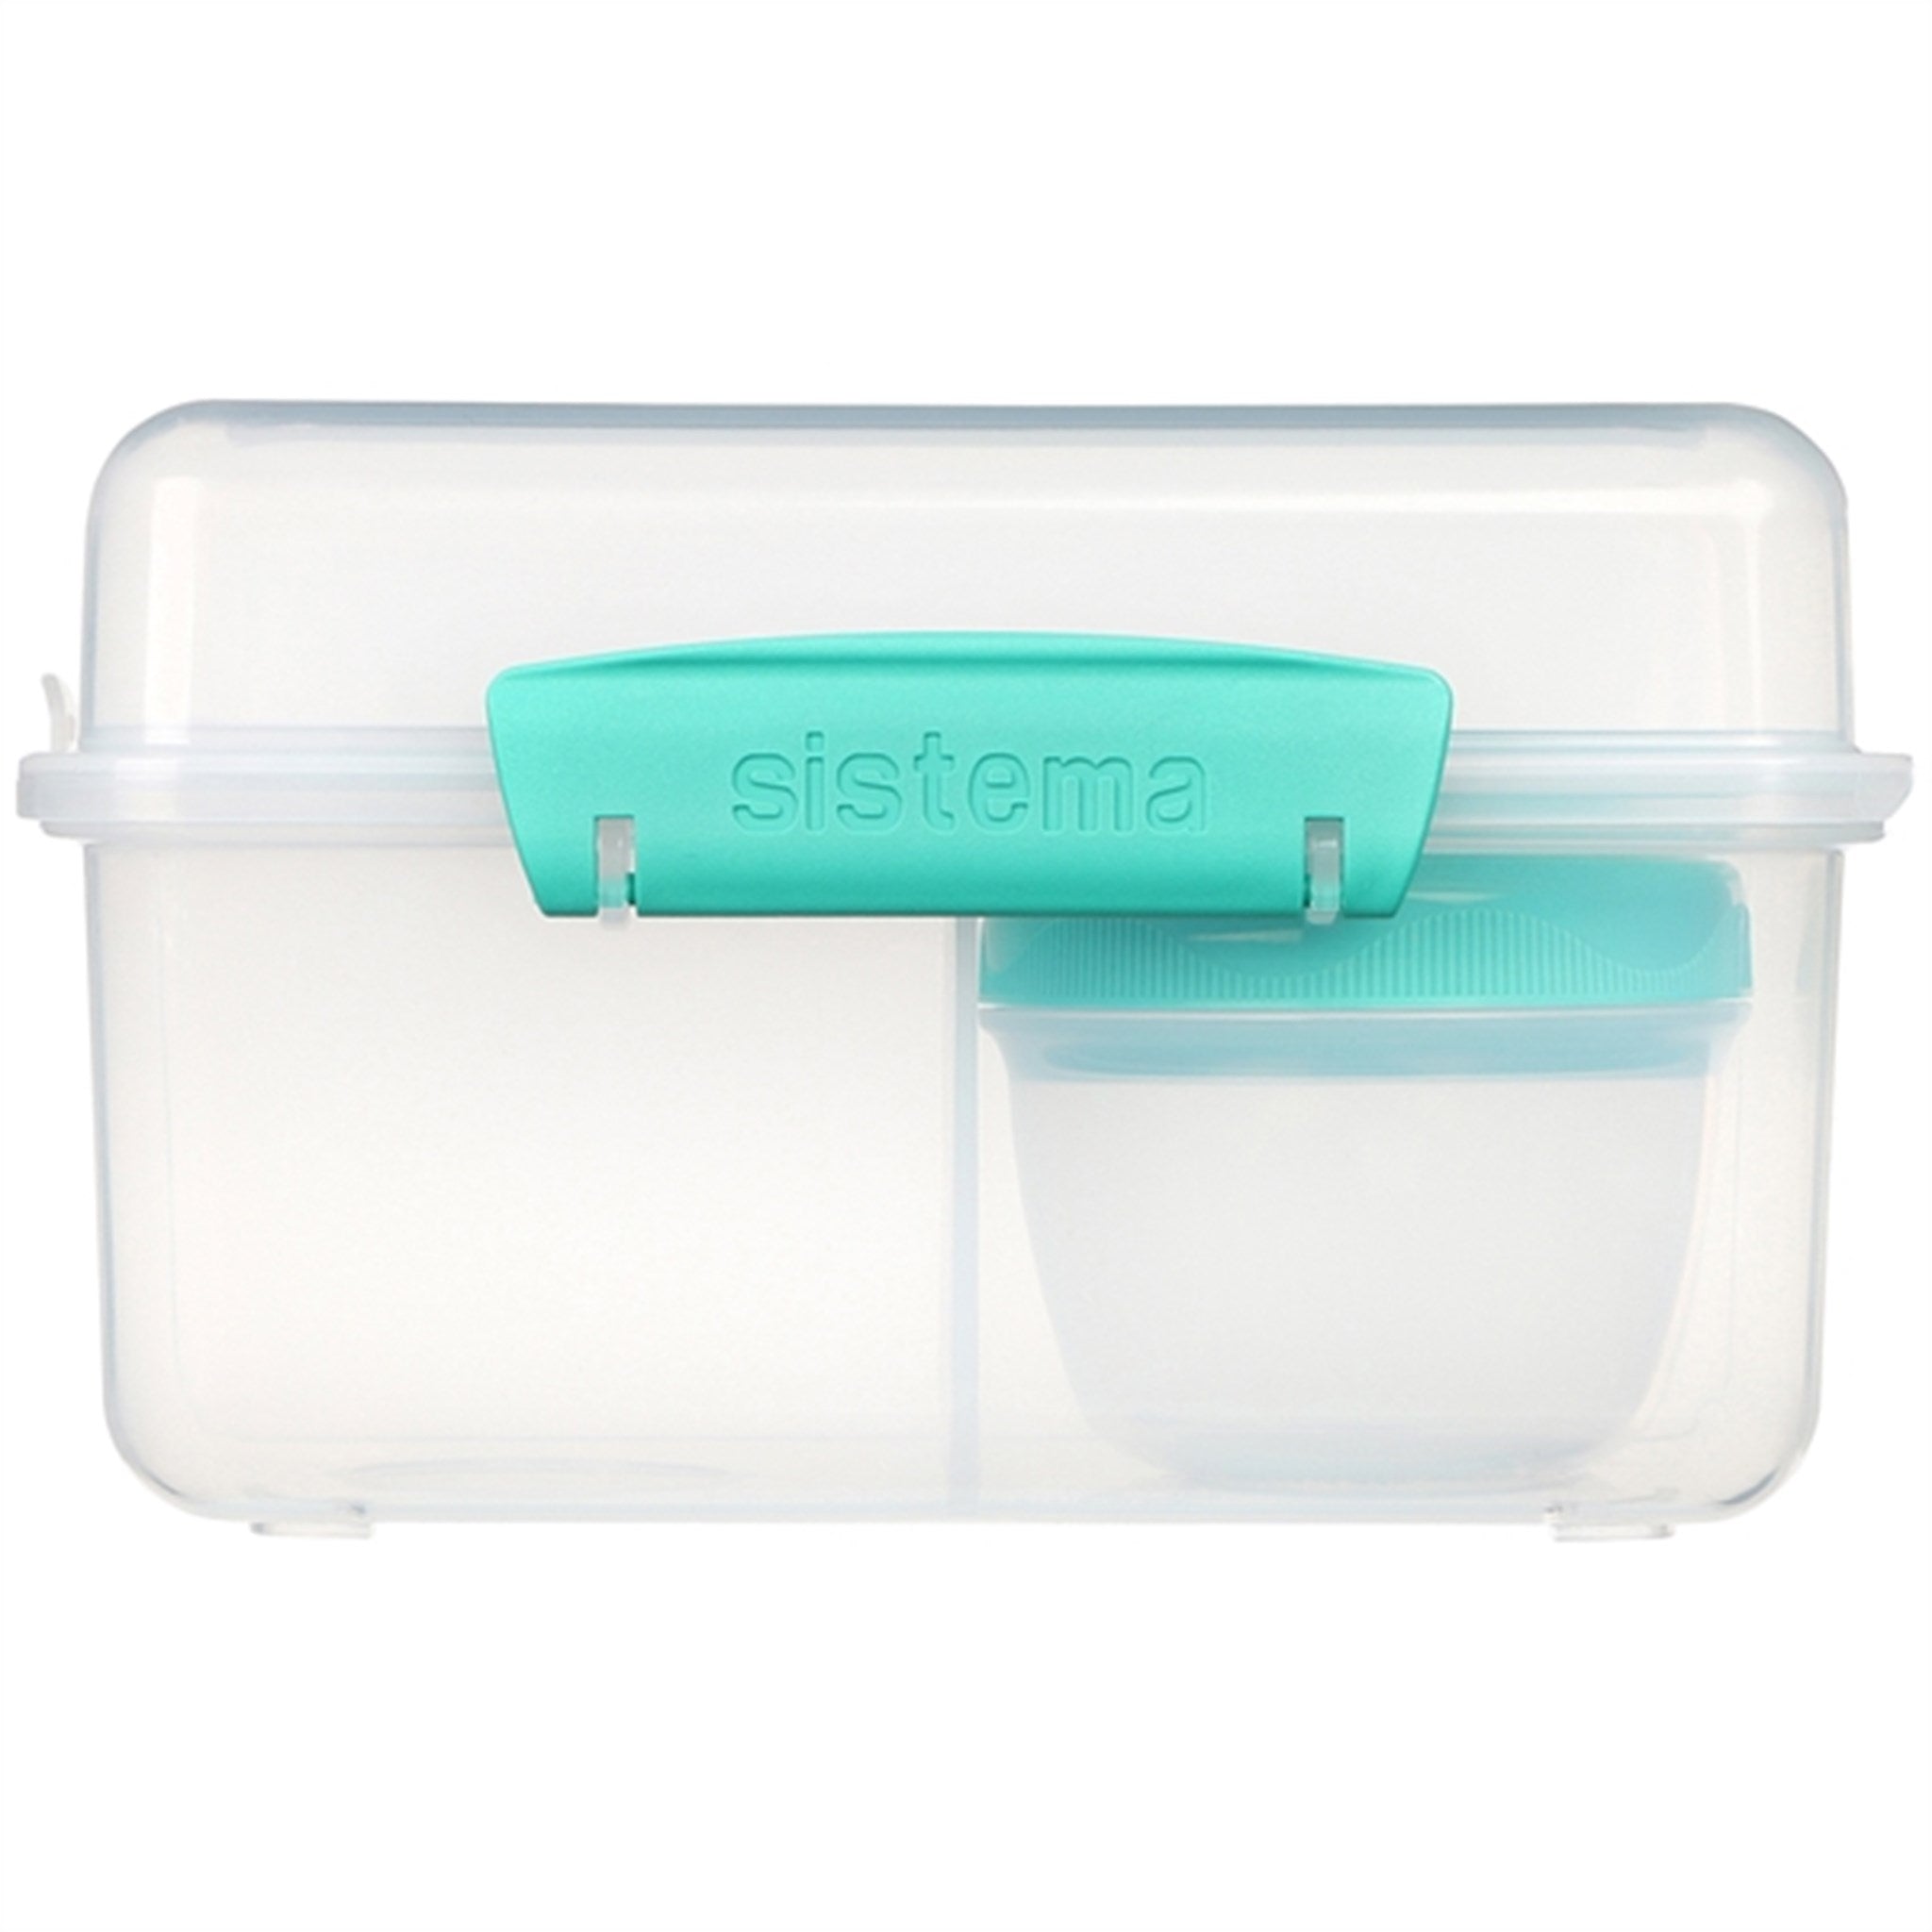 Sistema To Go Lunch Cube Max Matboks 2 L Minty Teal 2